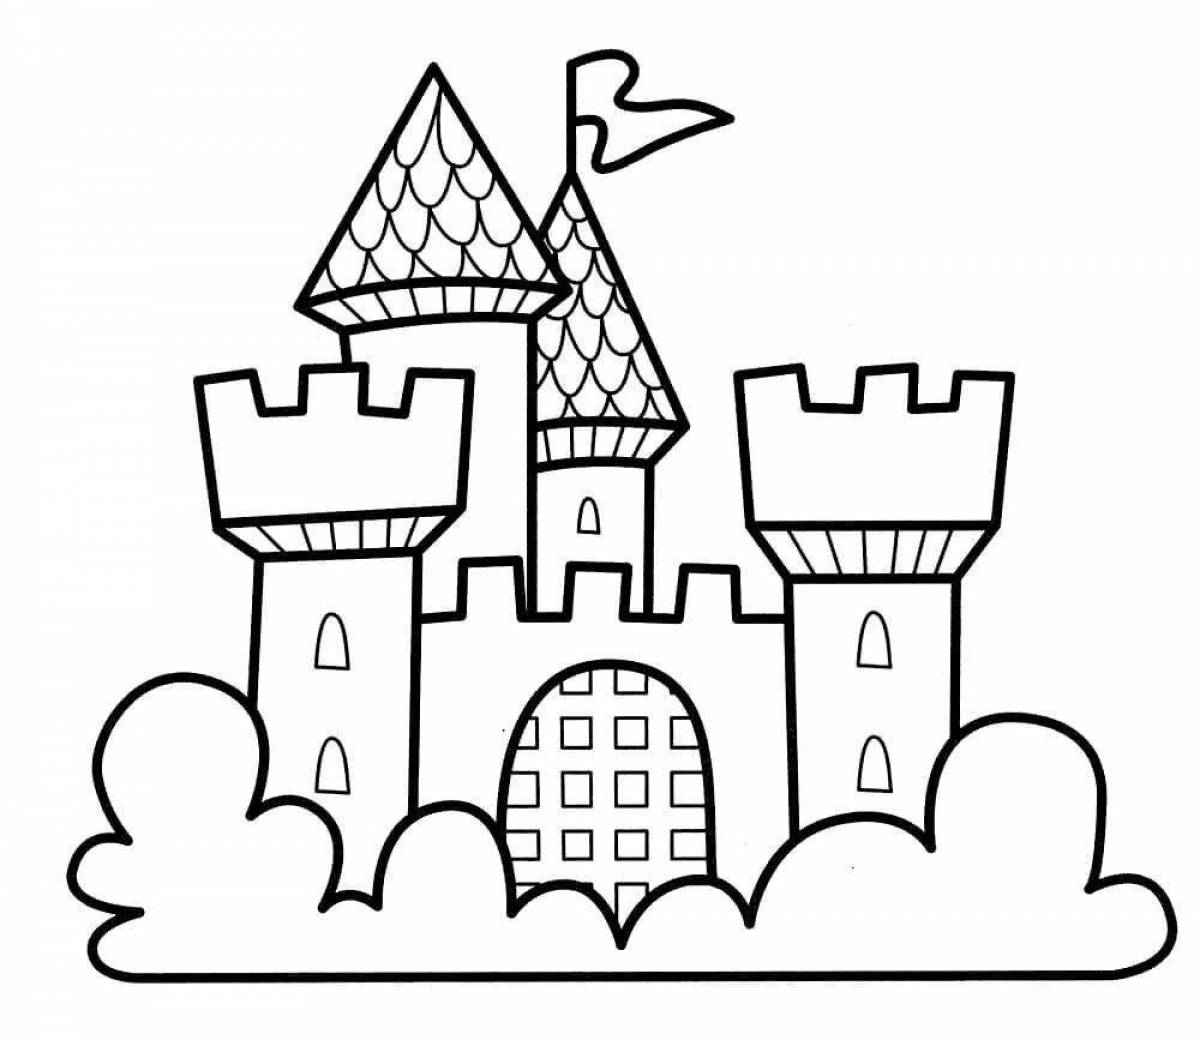 Impressive castle coloring book for children 6-7 years old